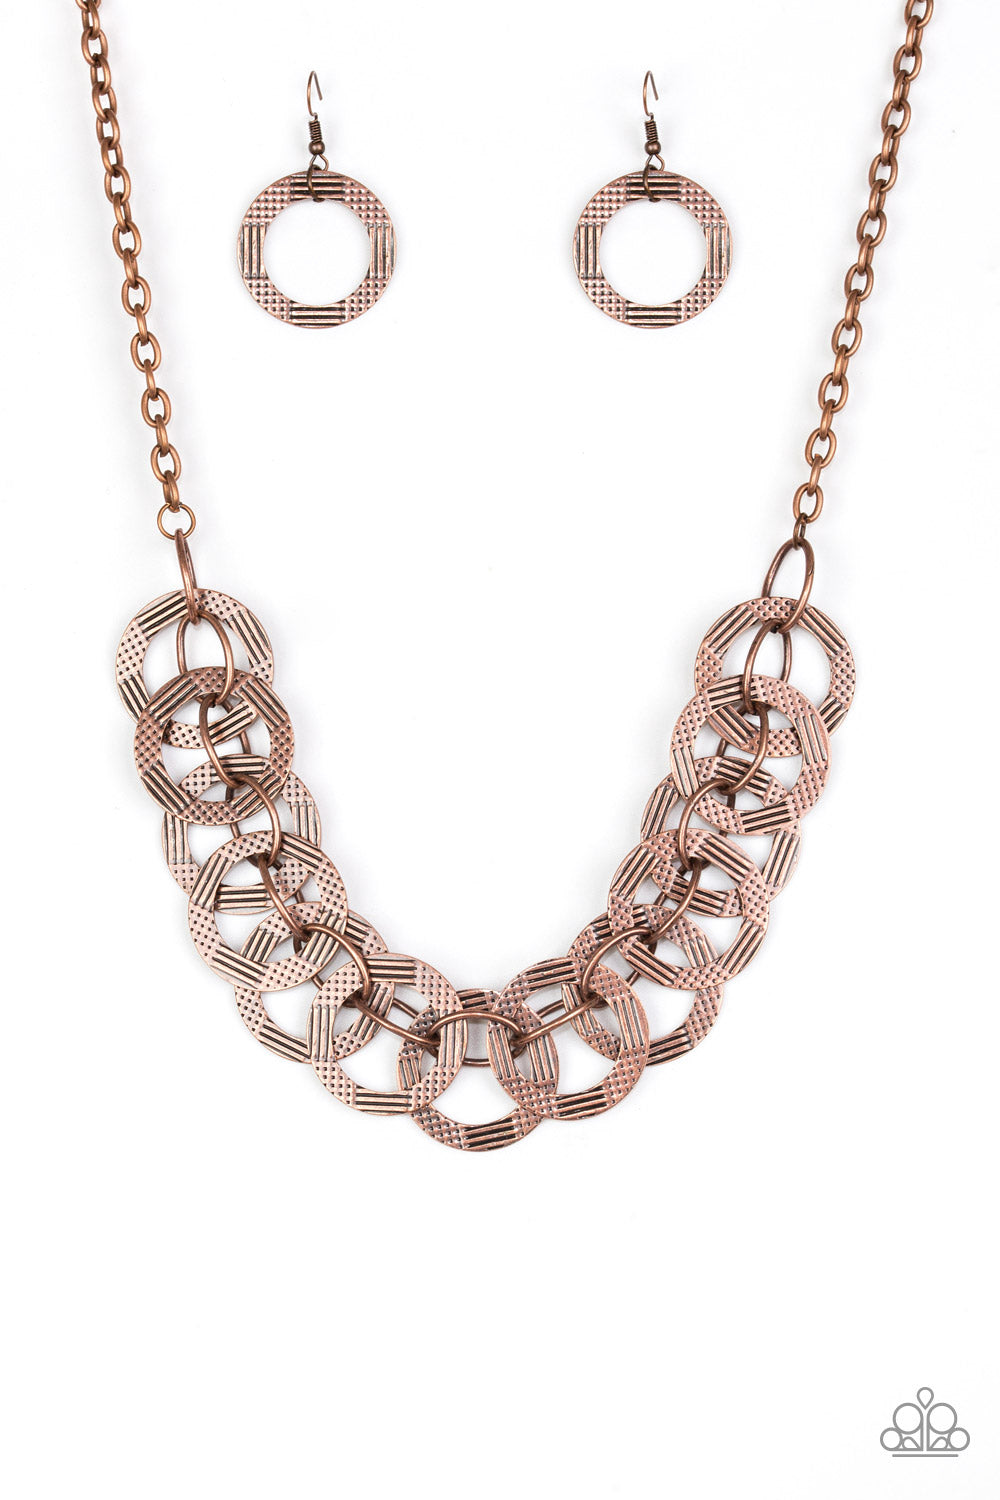 The Main Contender - Copper necklace w/ matching bracelet